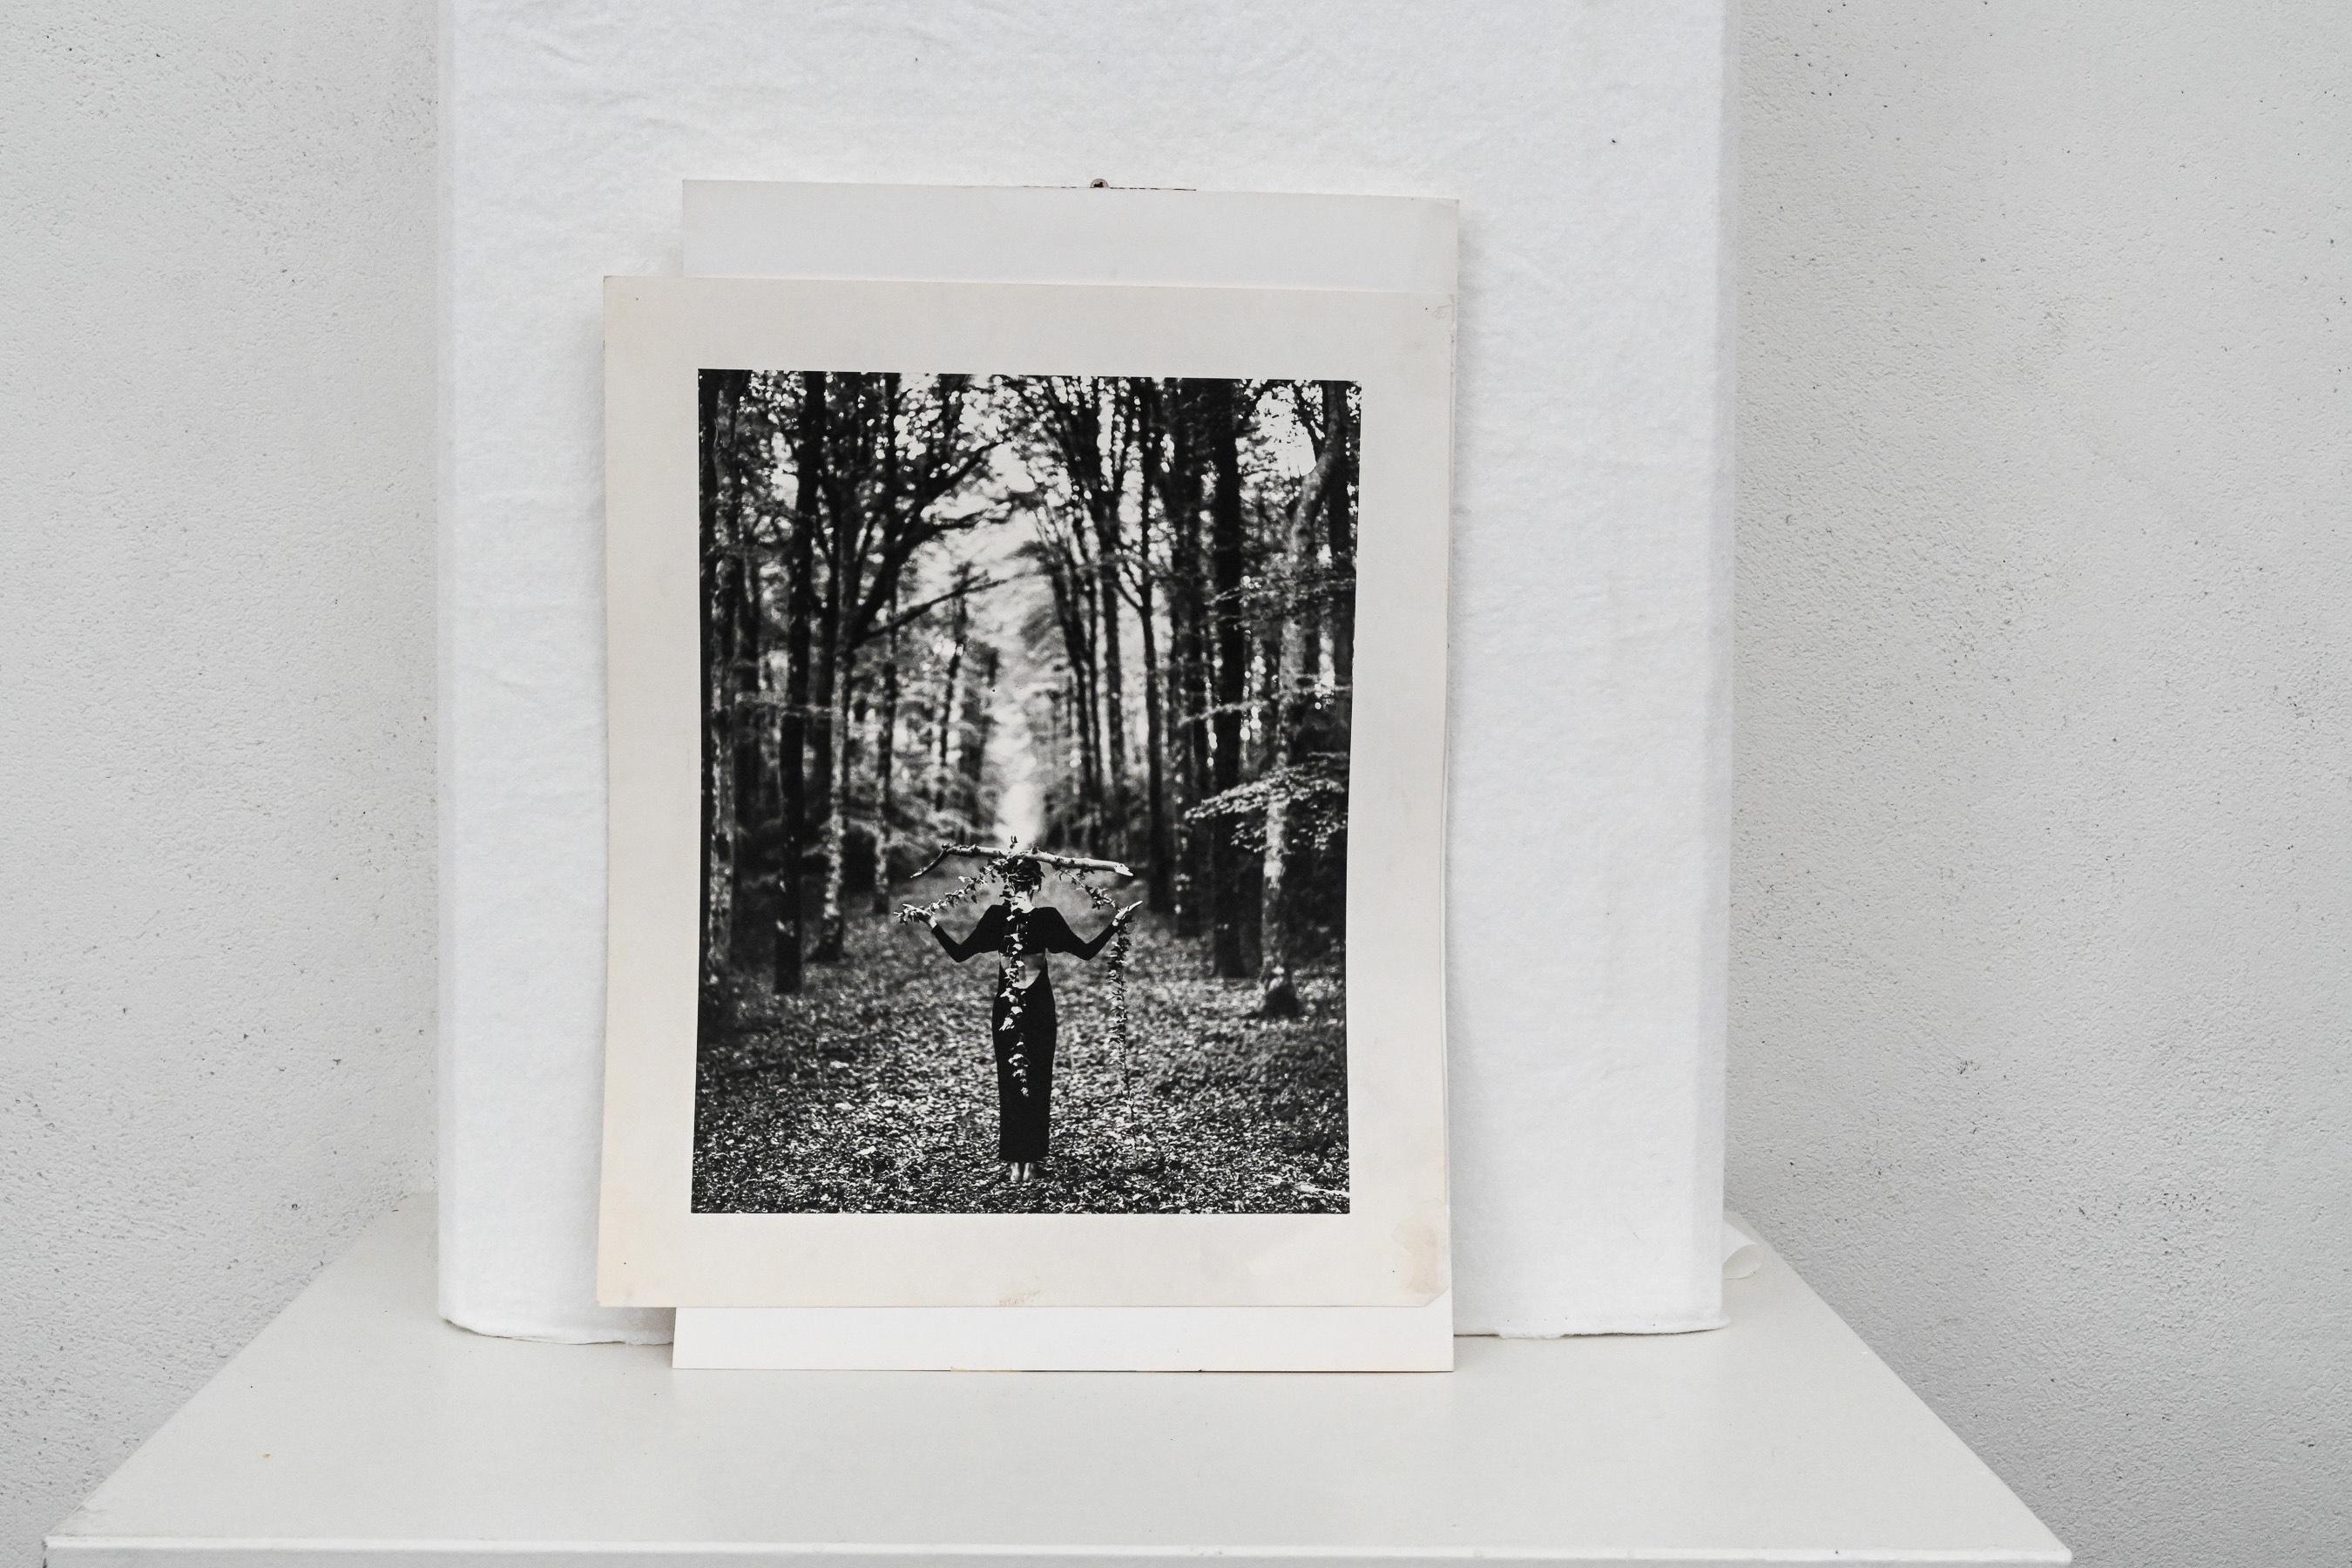 Original photograph of model in the woods by Bruce Weber for Karl Lagerfeld 4 For Sale 4